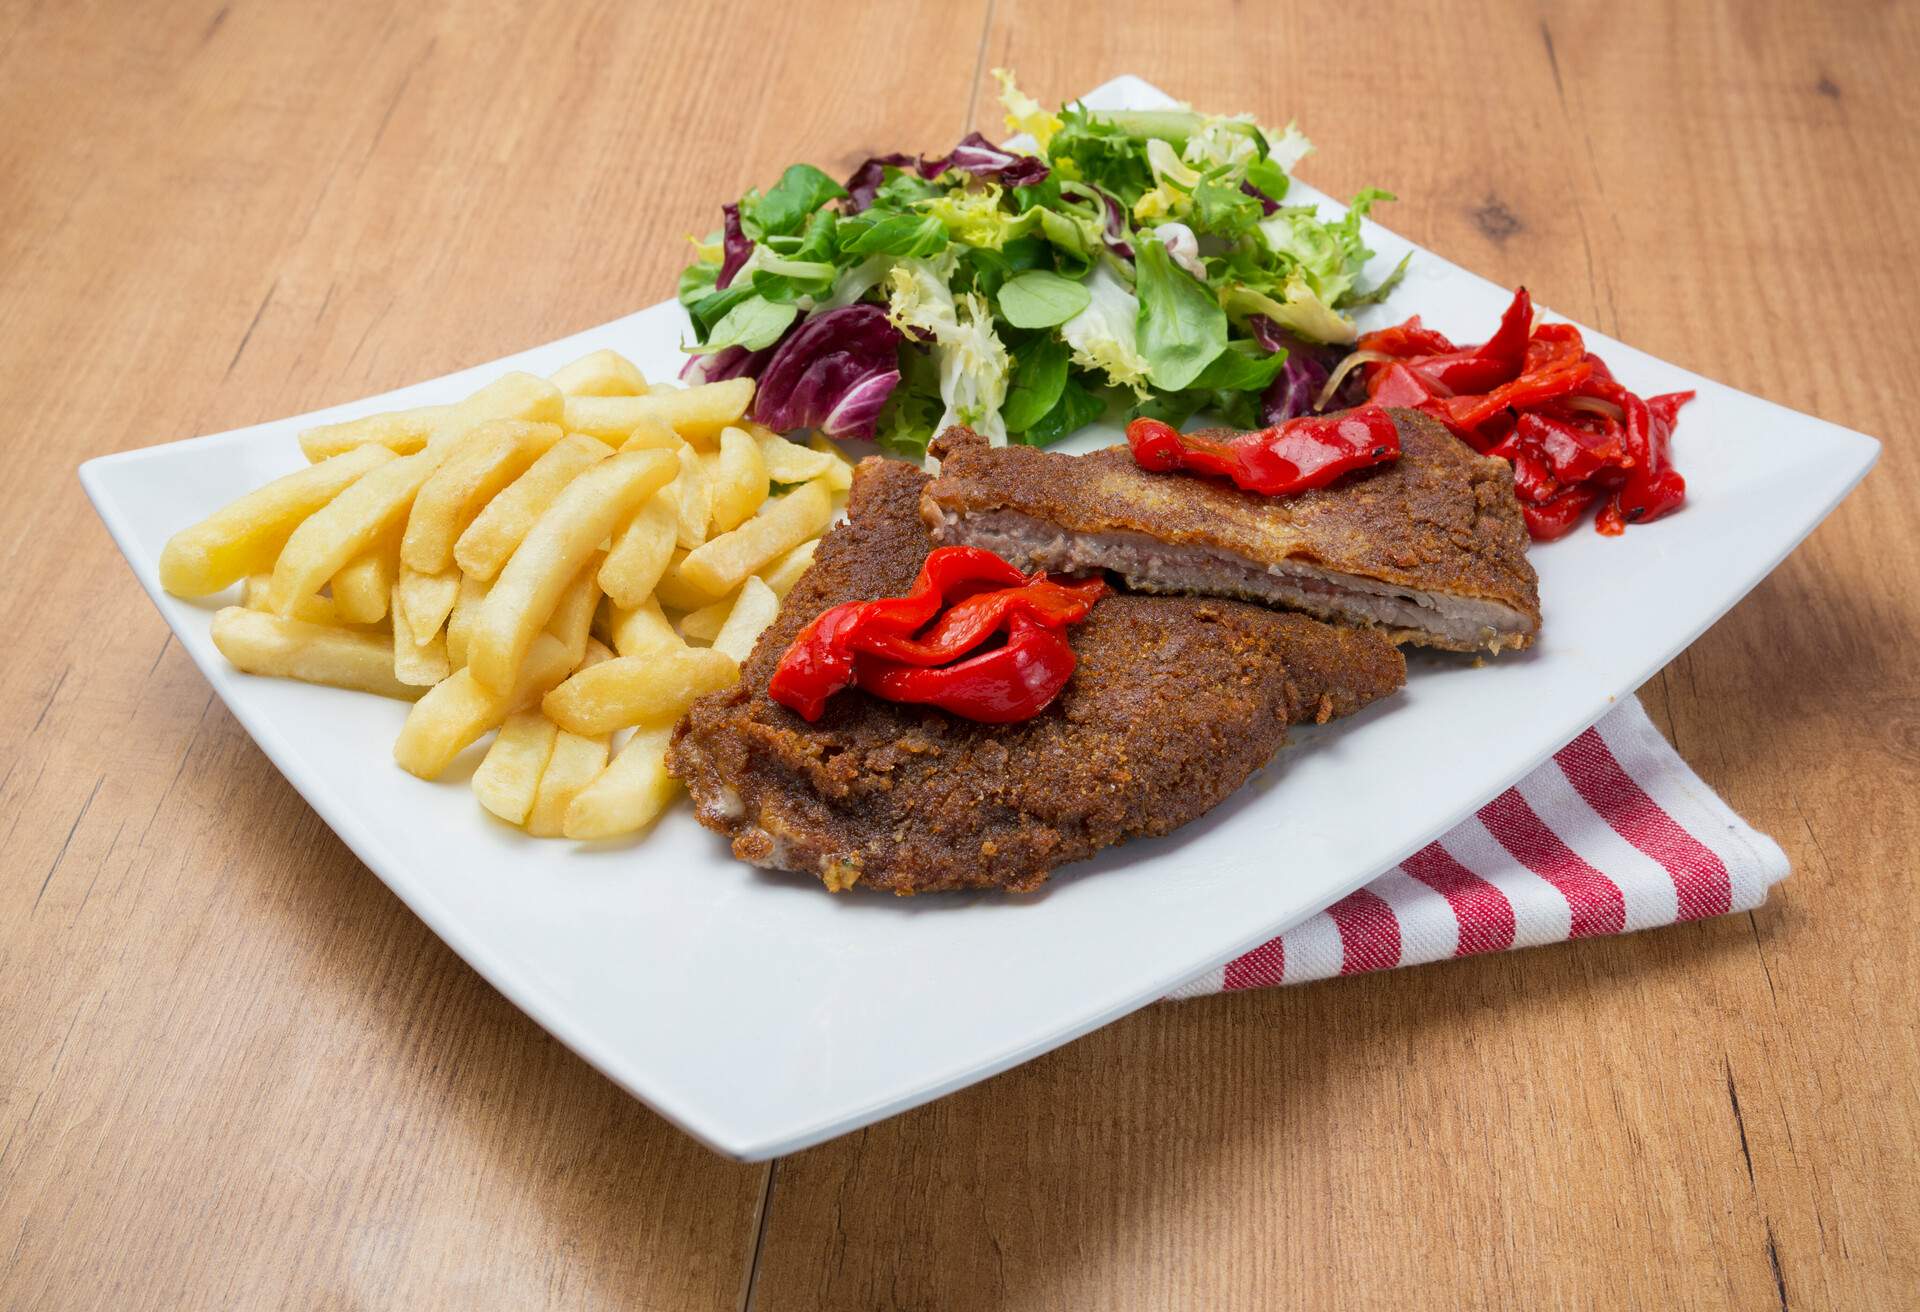 Cachopo,typical cuisine from Asturias